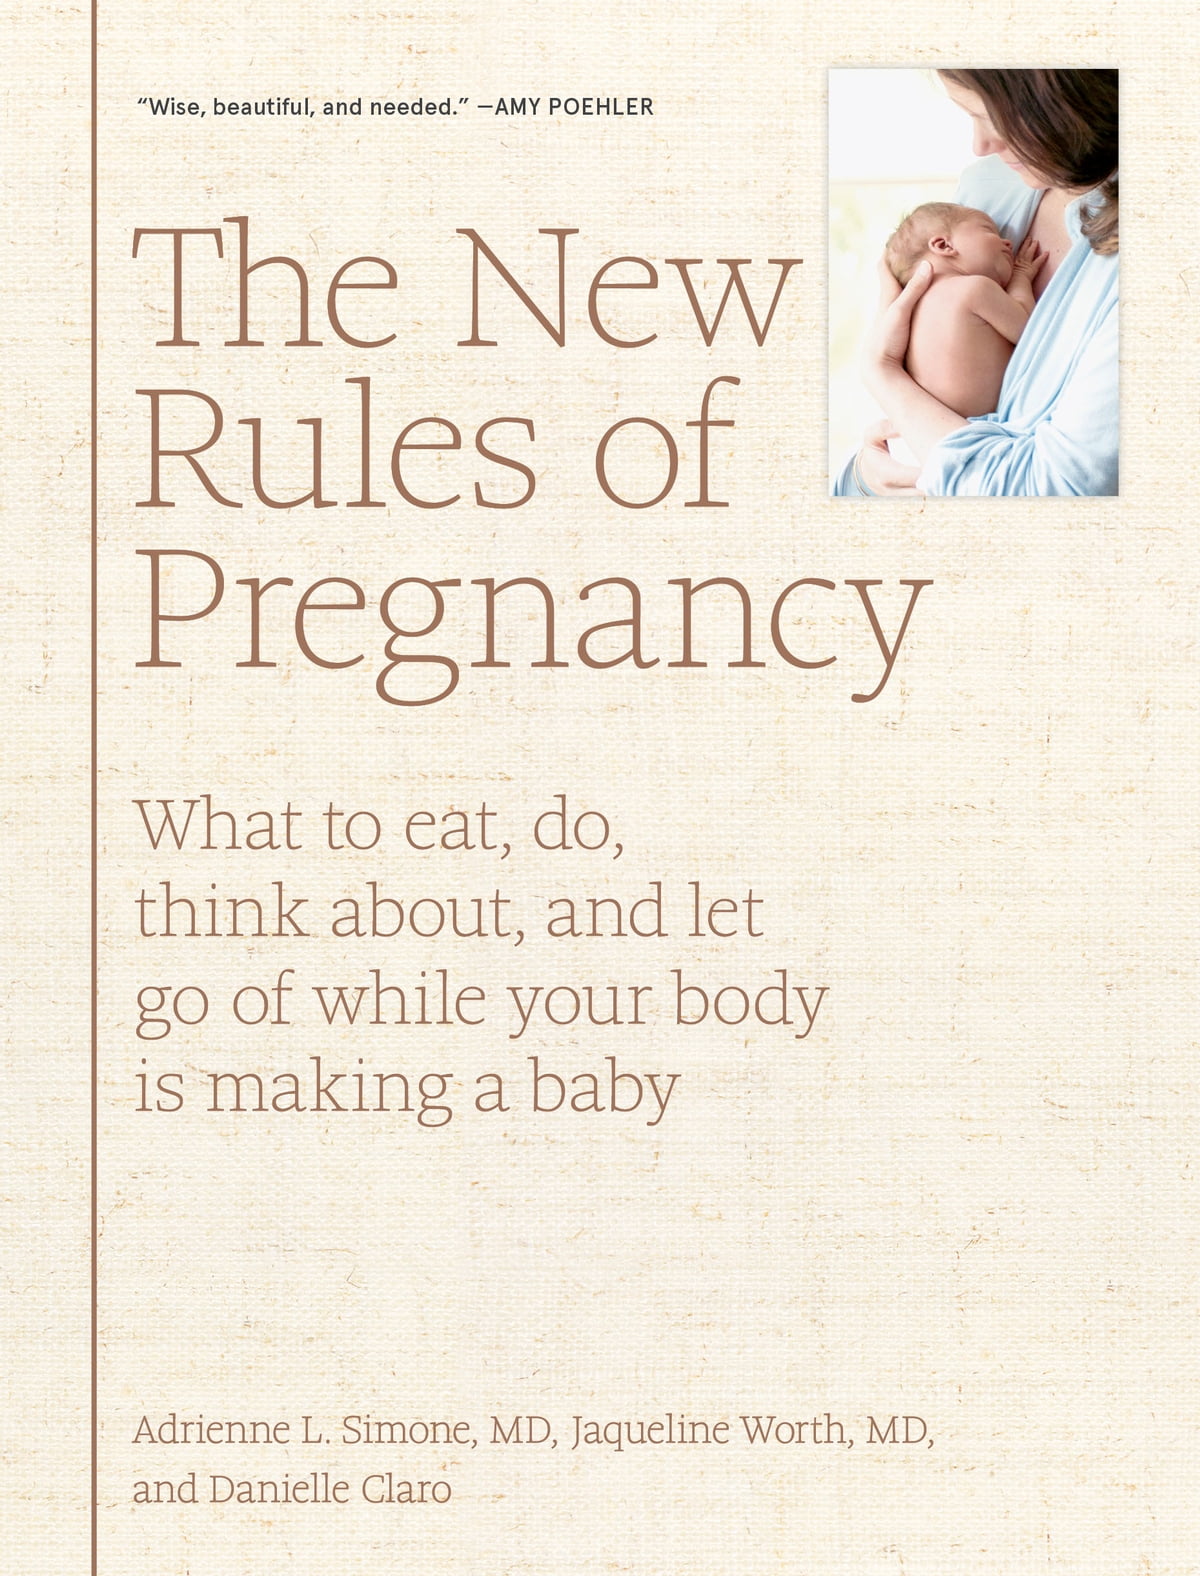 The New Rules of Pregnancy: What to Eat, Do, Think About, and Let Go Of While Your Body Is Making a Baby by JACQUELINE WORTH M.D. AND DANIELLE CLARO